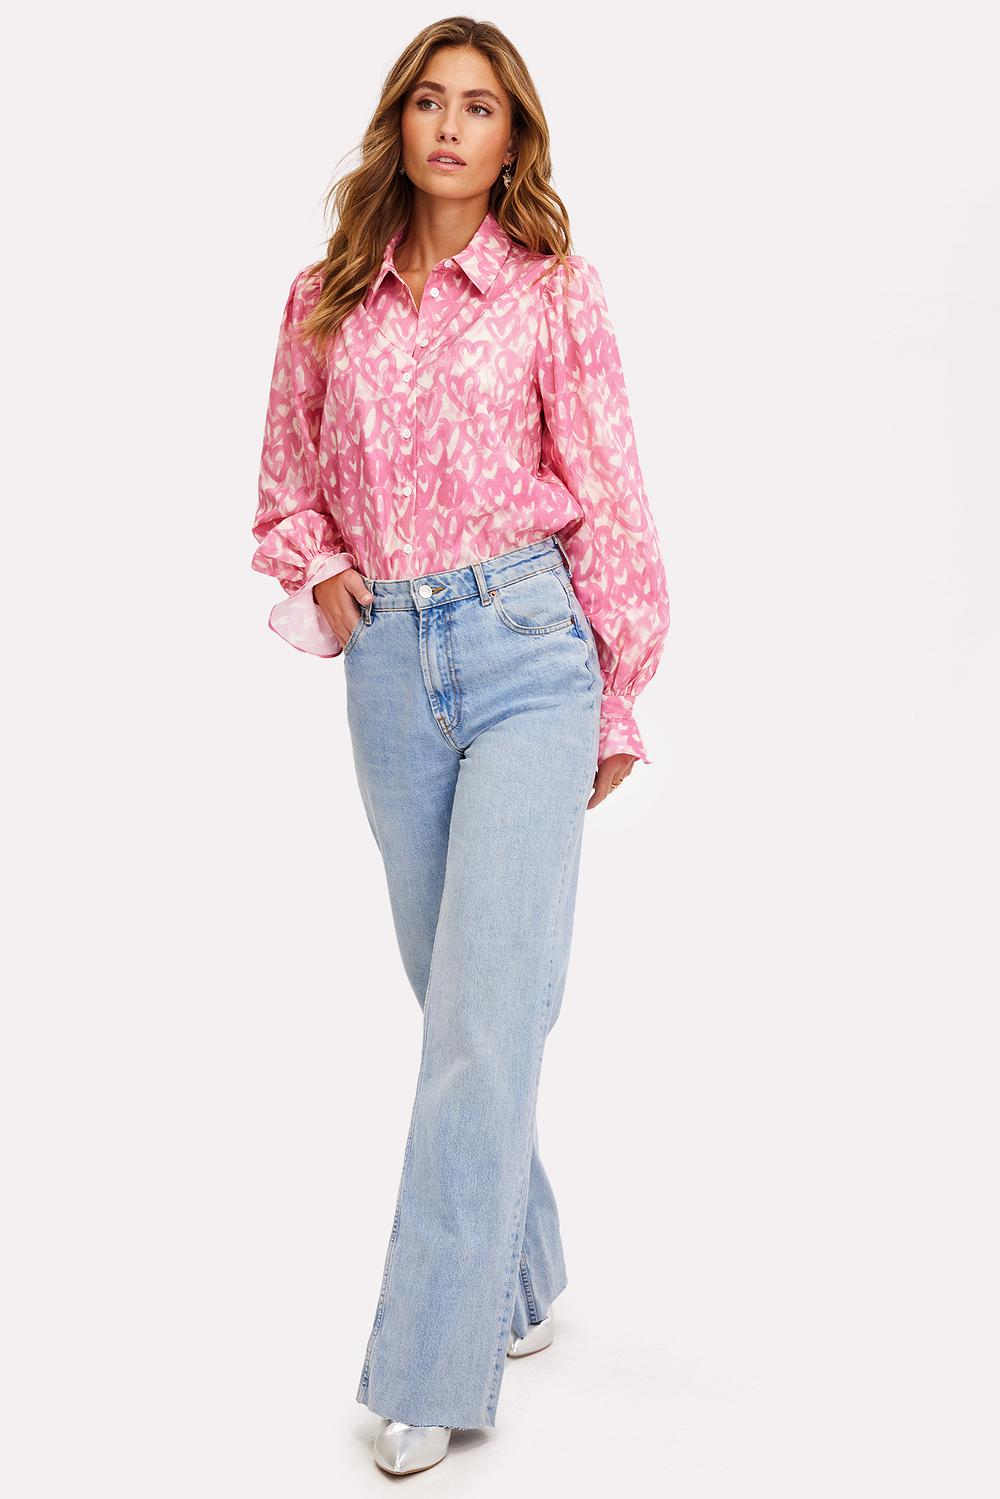 The PERFECT blouse just hit the floor!! We are LOVING the light